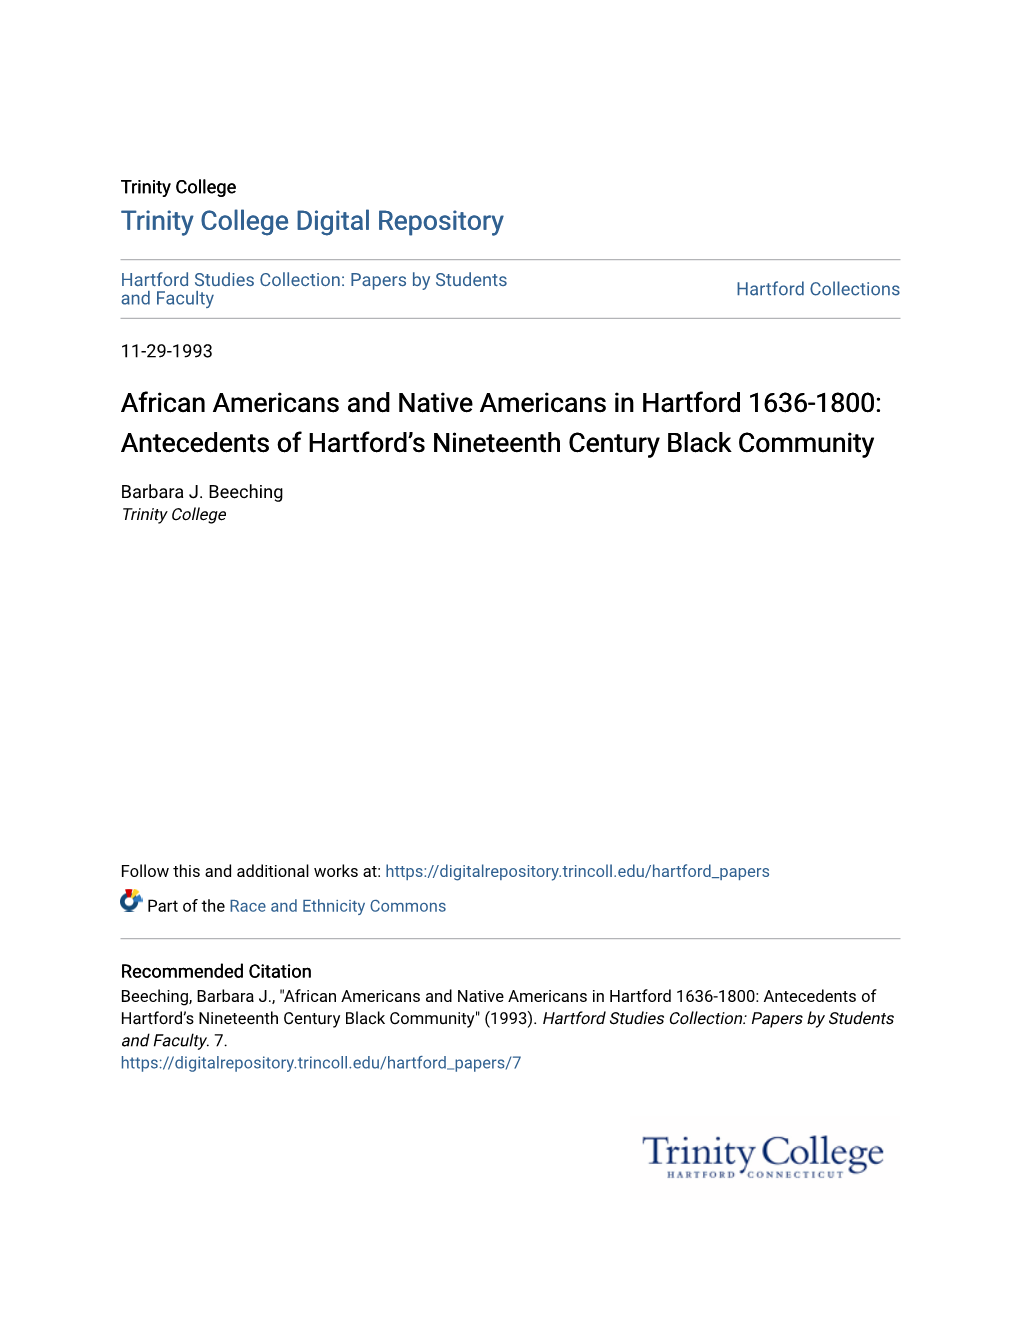 African Americans and Native Americans in Hartford 1636-1800: Antecedents of Hartford’S Nineteenth Century Black Community